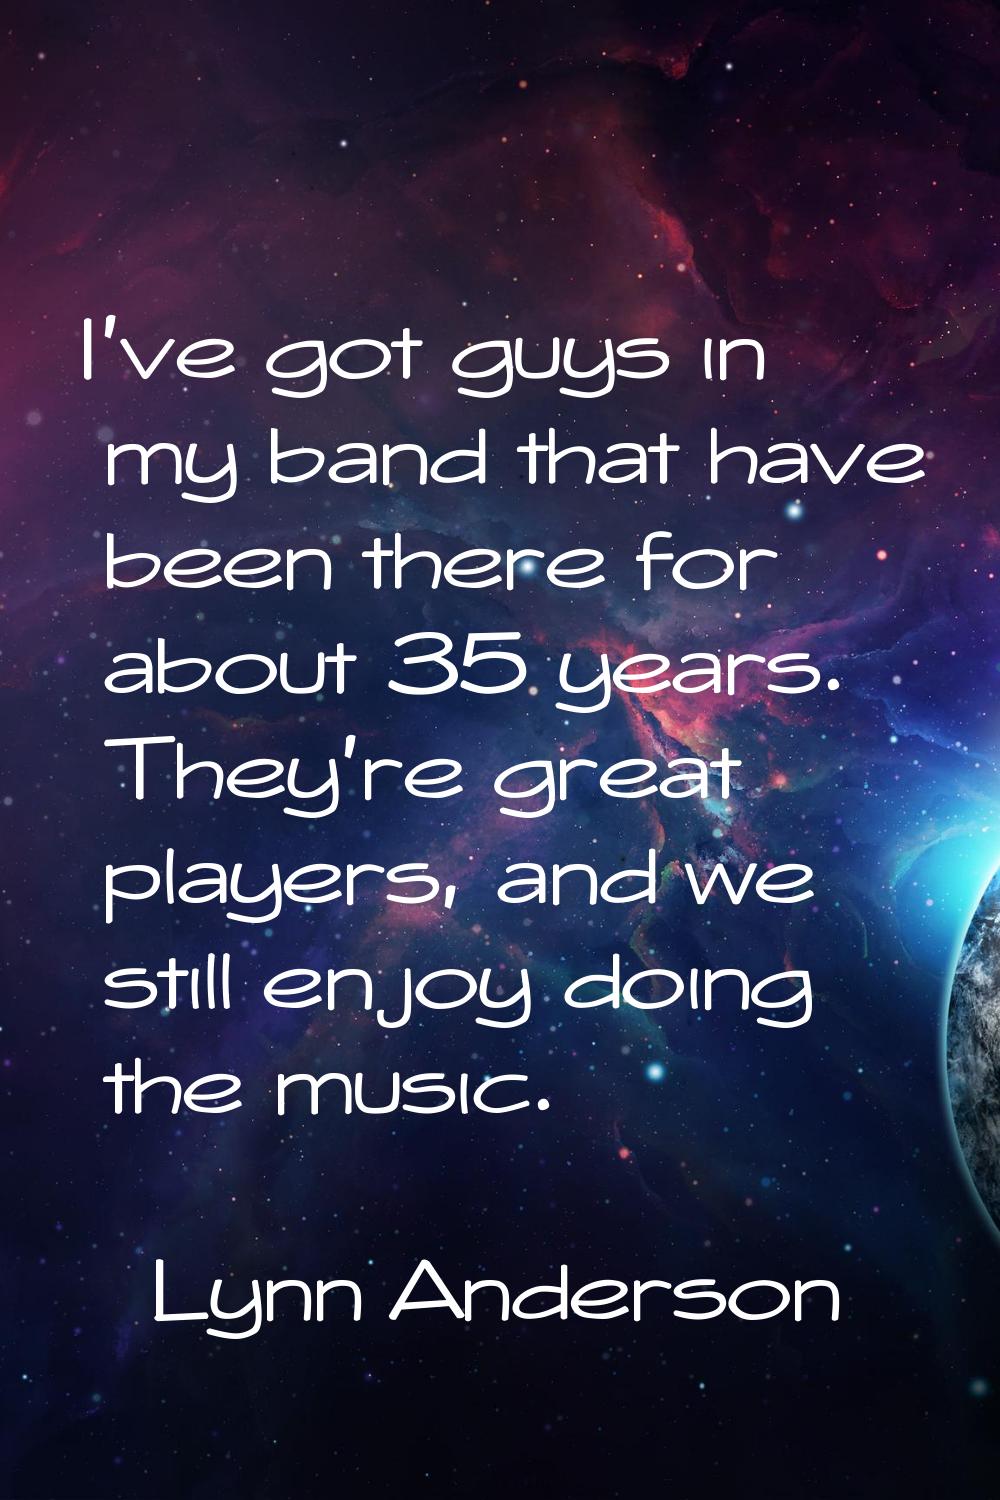 I've got guys in my band that have been there for about 35 years. They're great players, and we sti